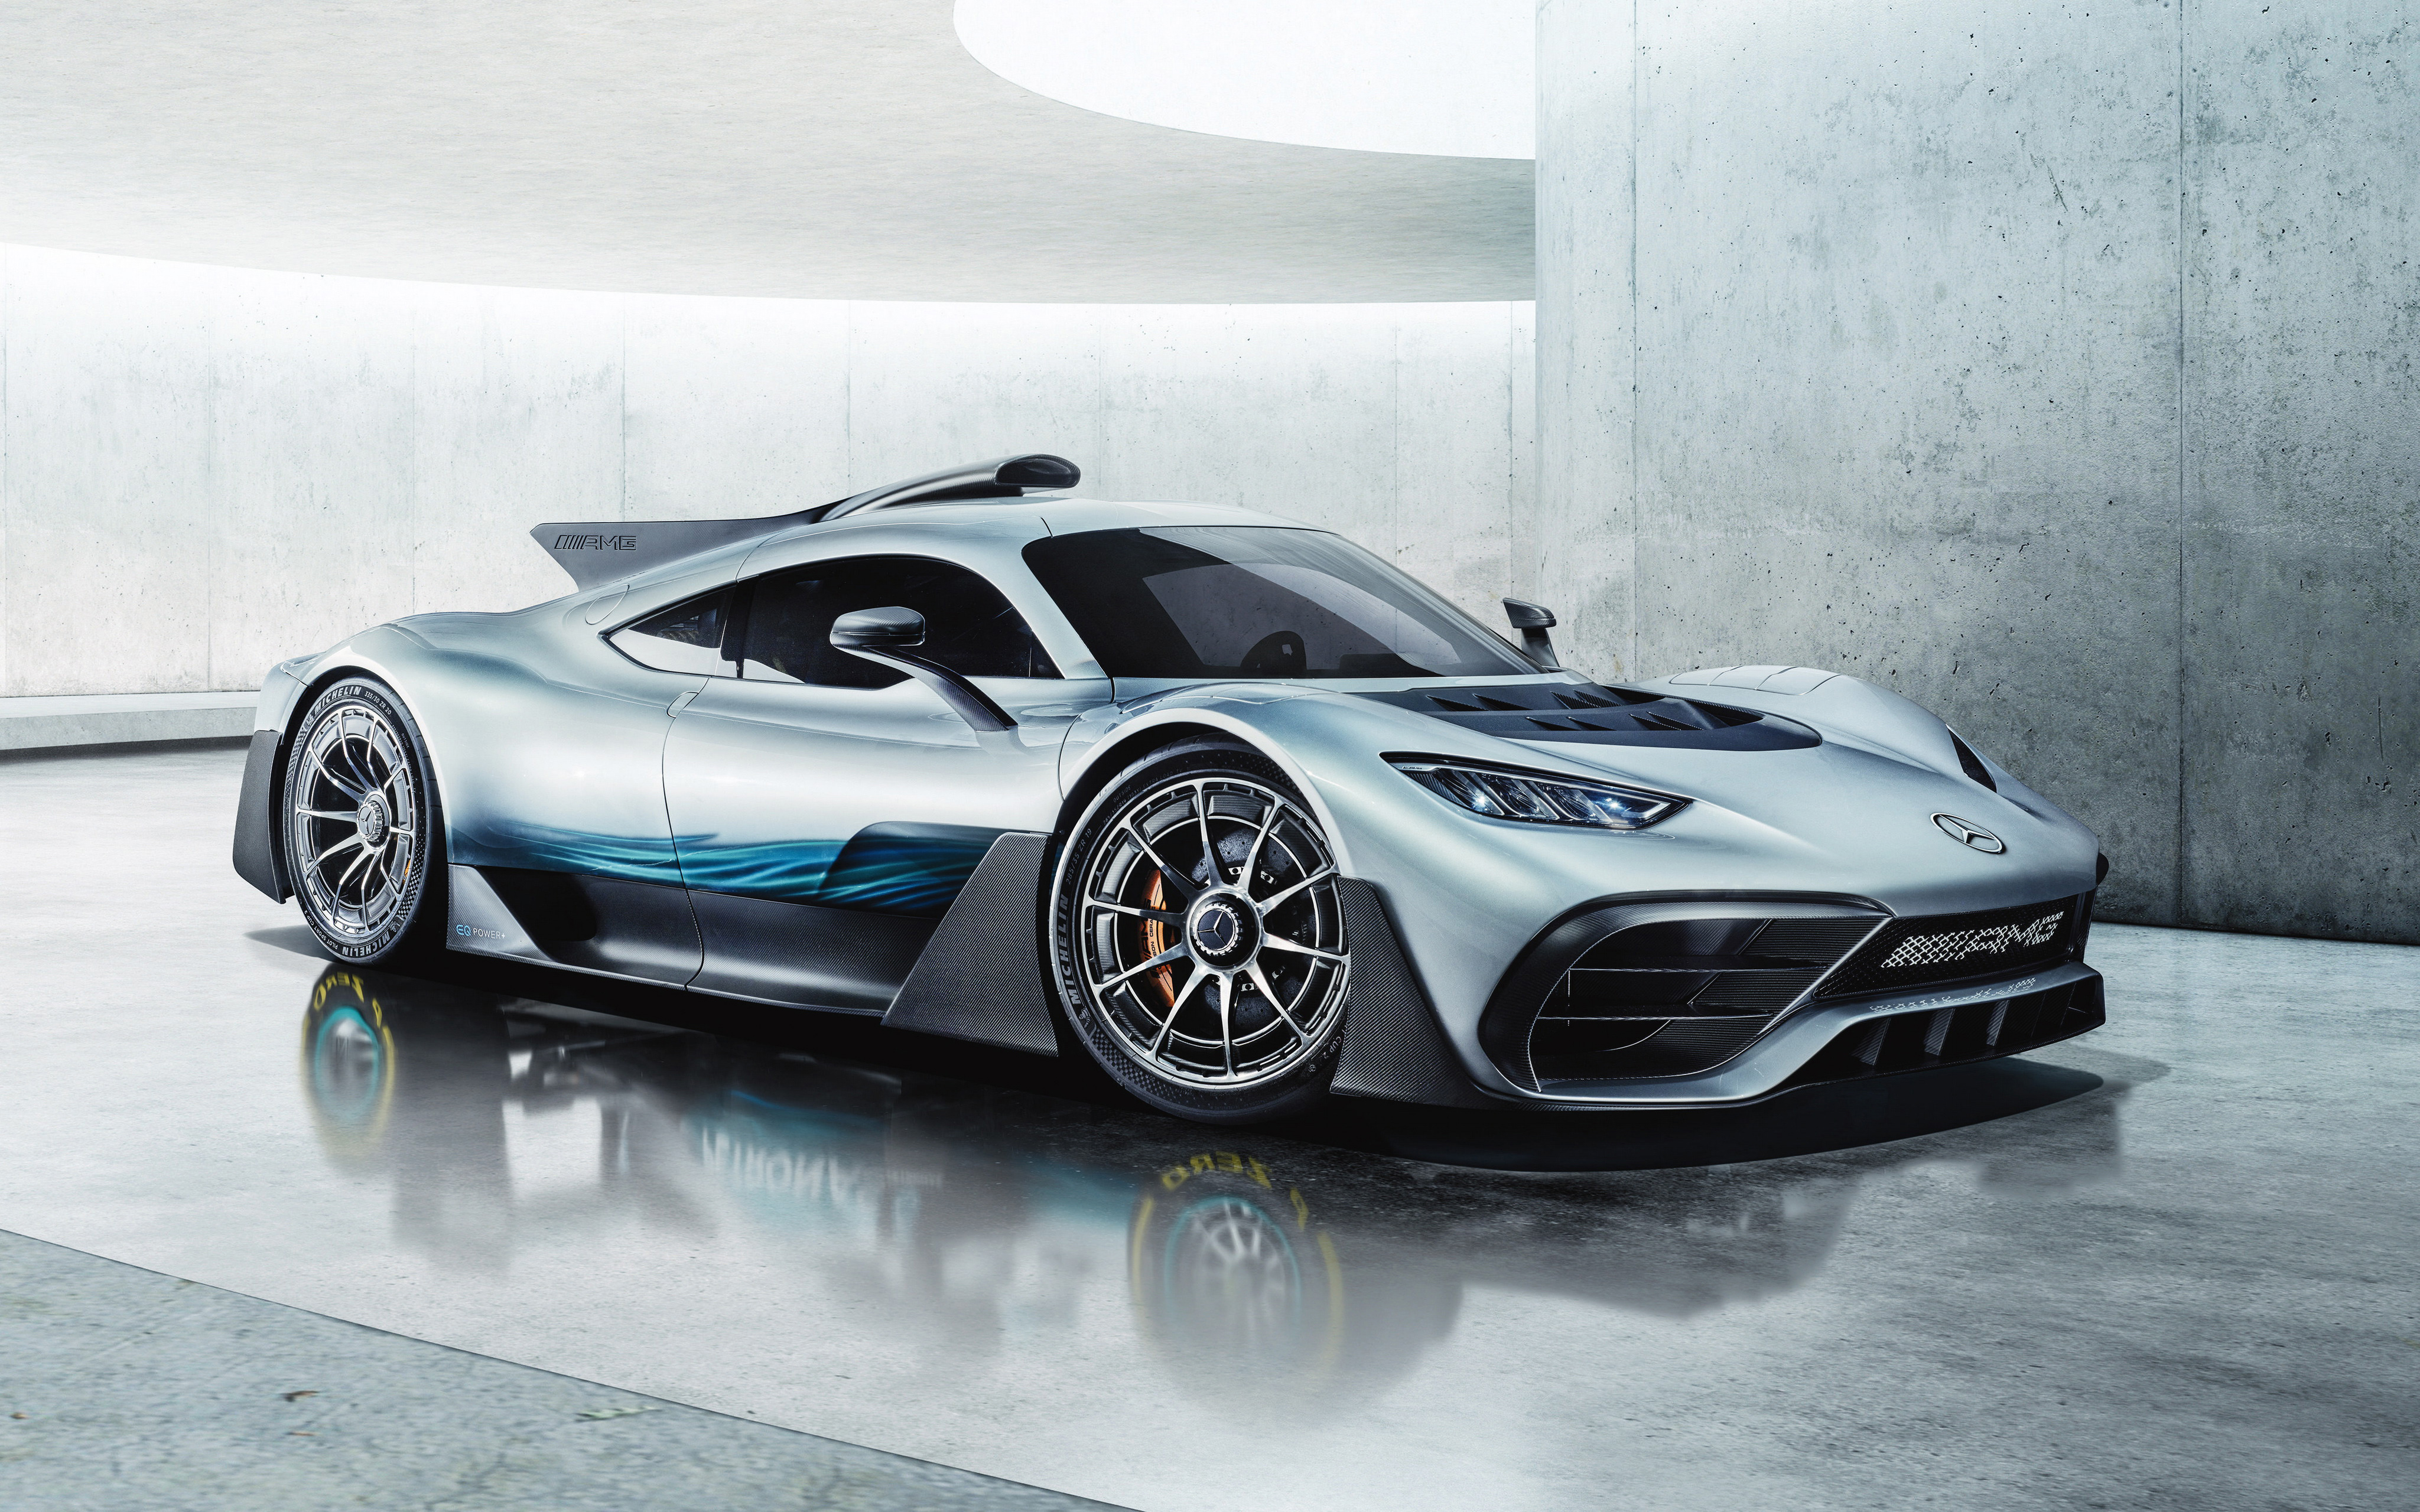 Mercedes AMG Project One 2019 4K Wallpapers